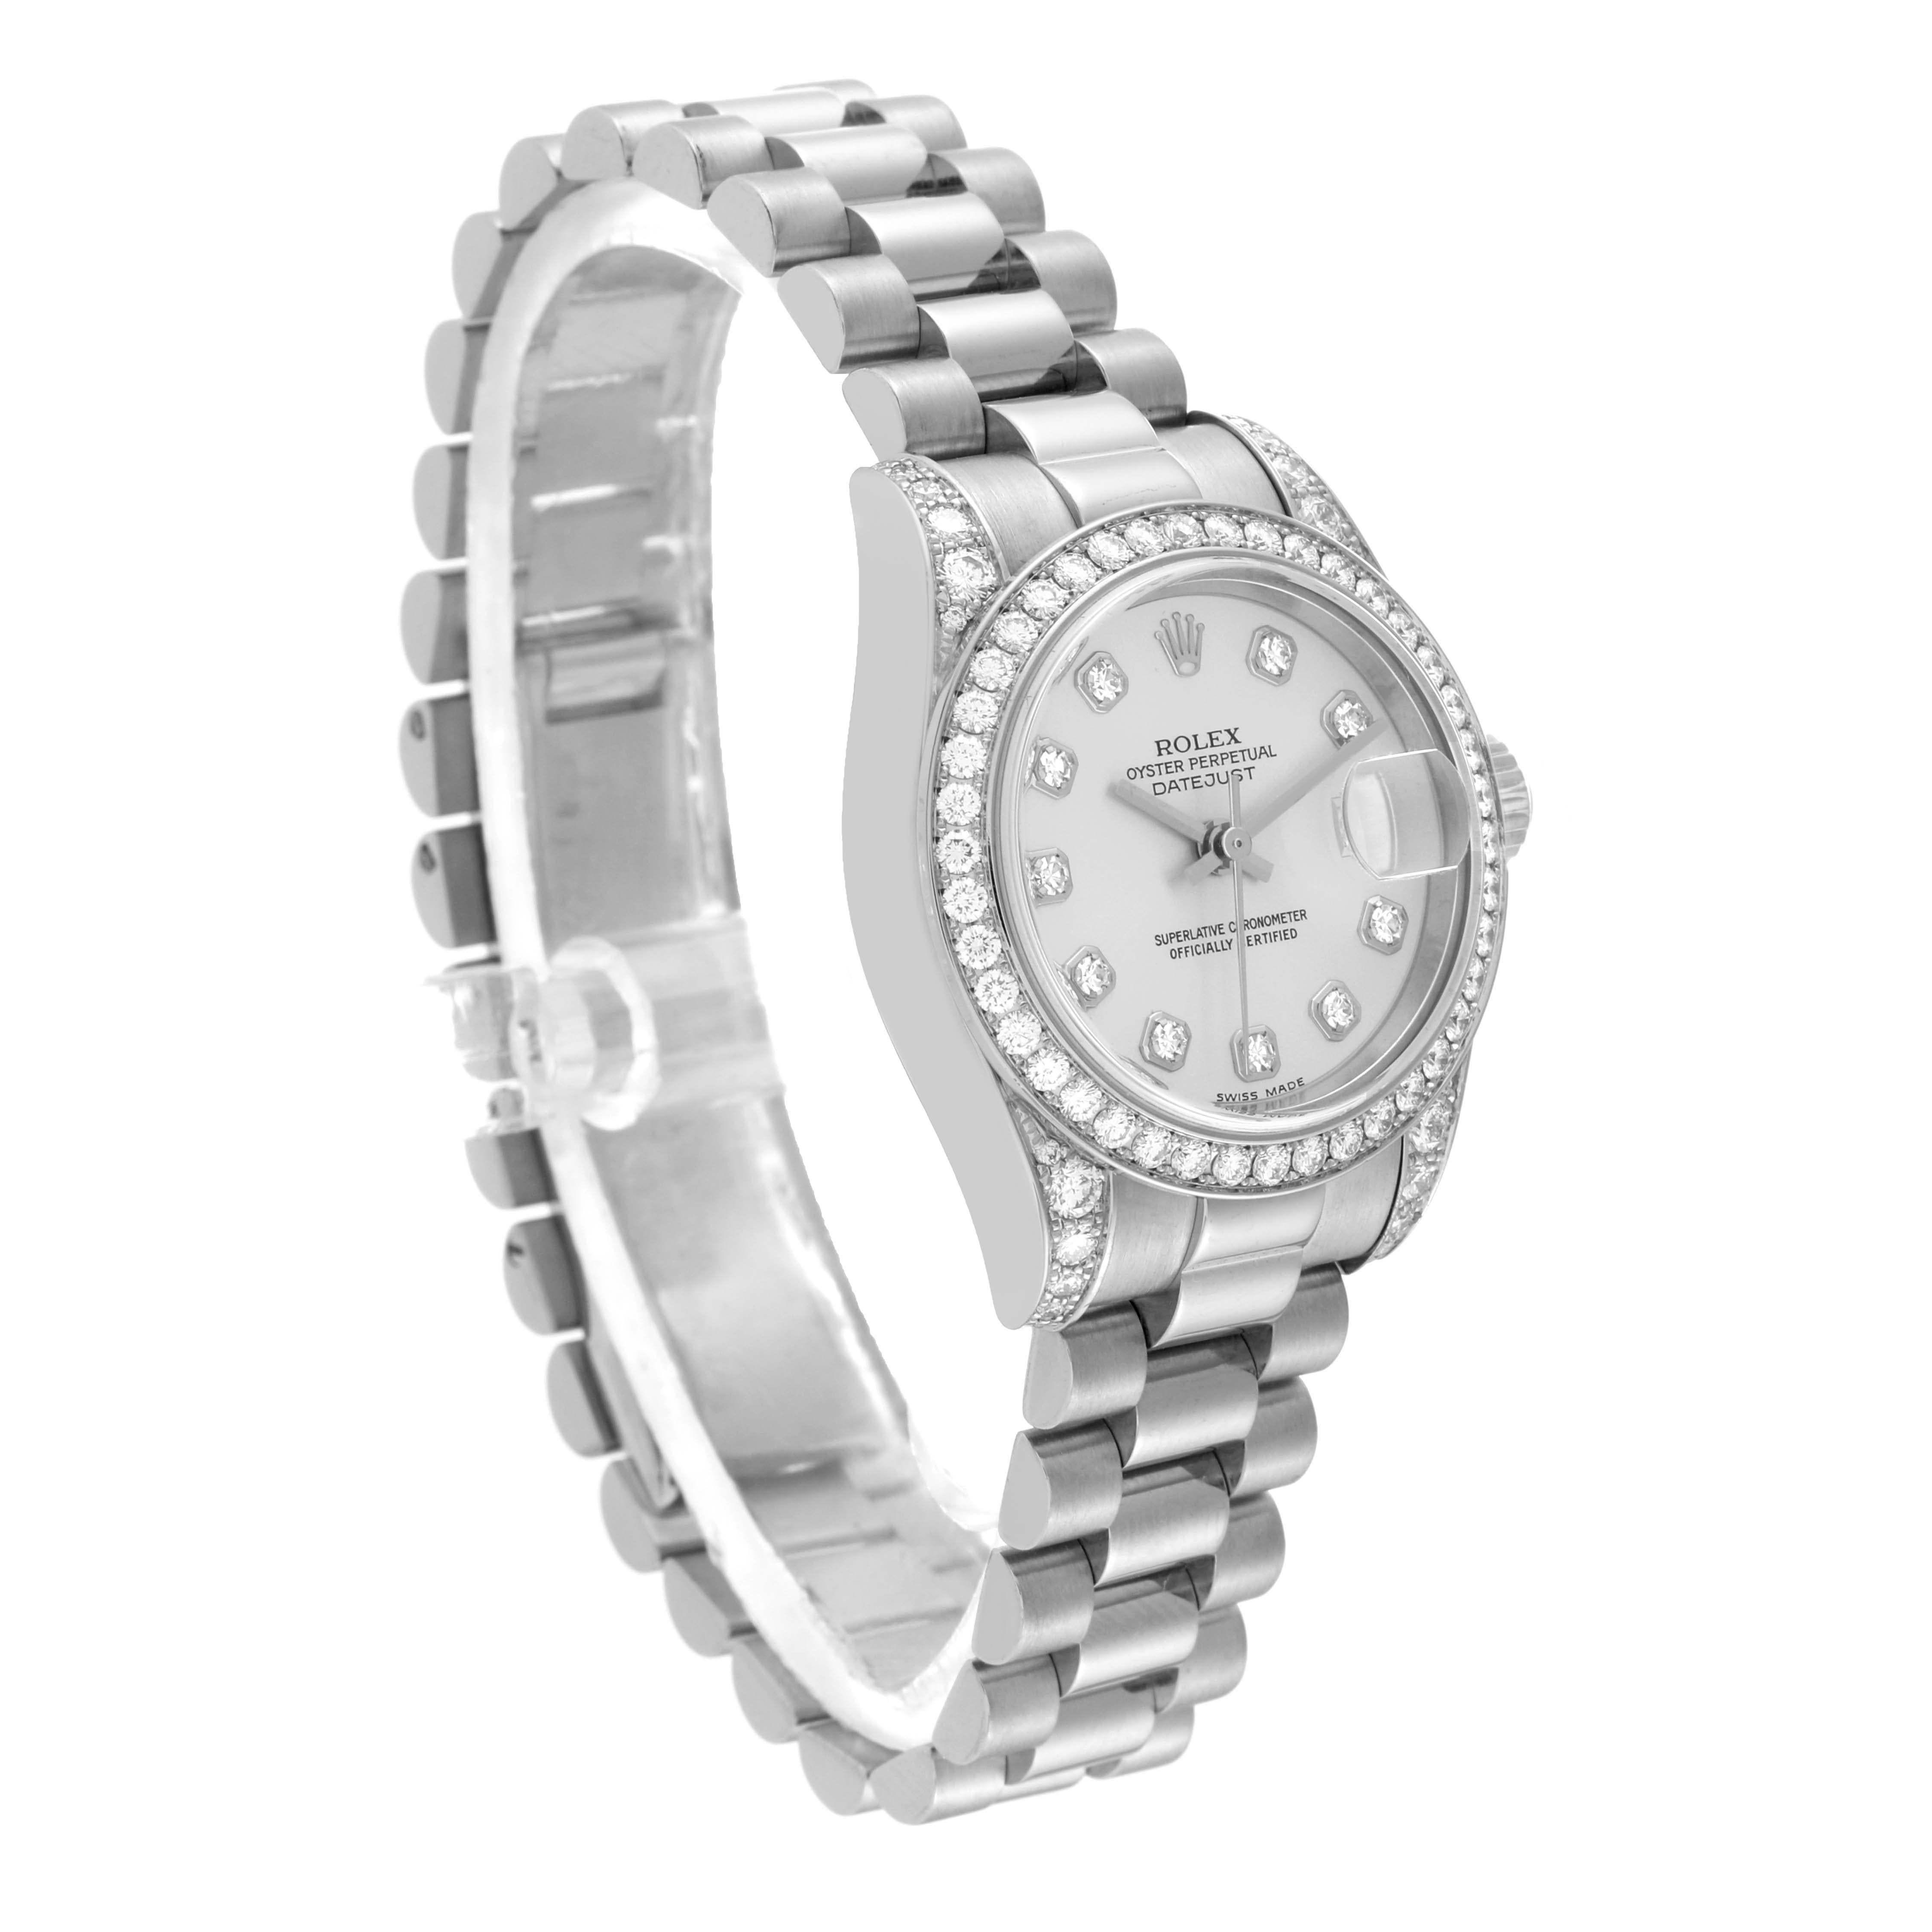 Rolex Datejust President White Gold Diamond Bezel Ladies Watch 179159 Box Papers For Sale 2